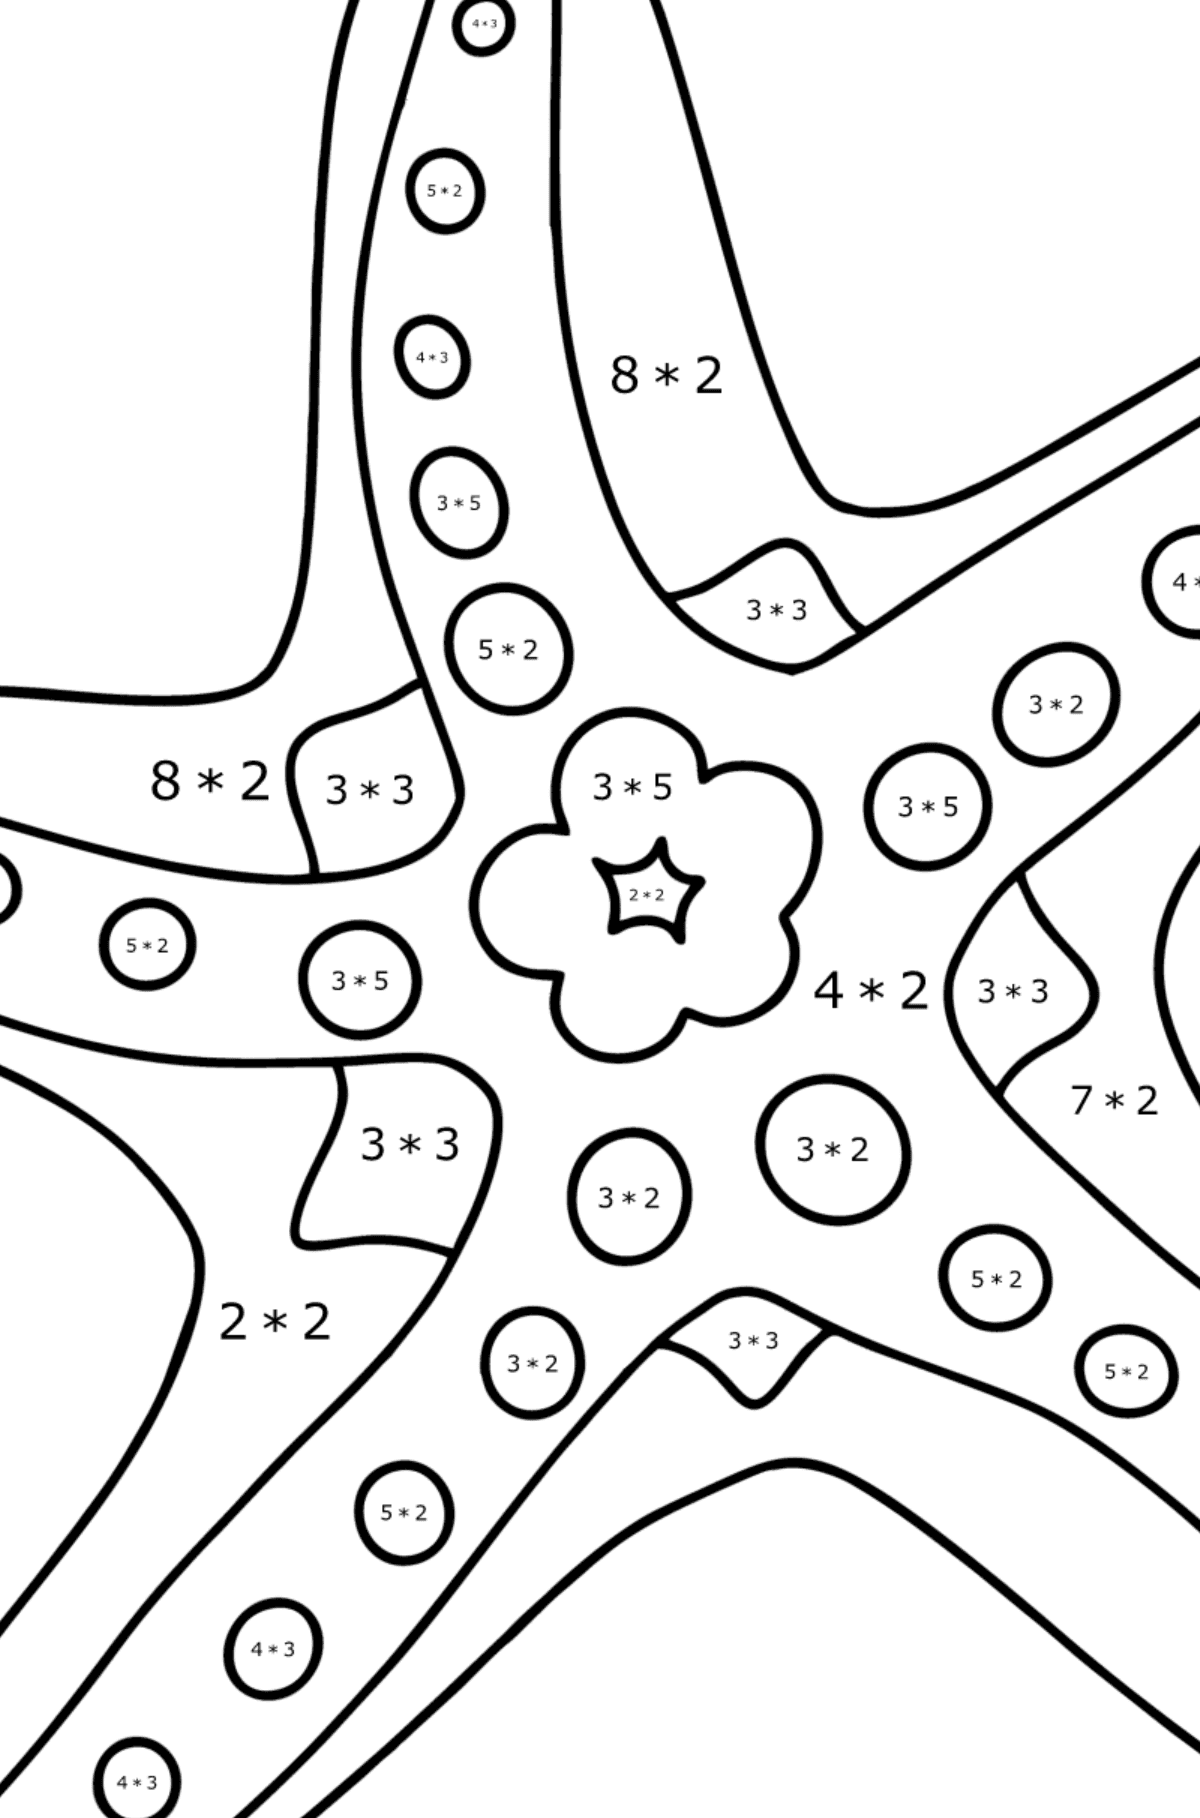 Starfish coloring page - Math Coloring - Multiplication for Kids